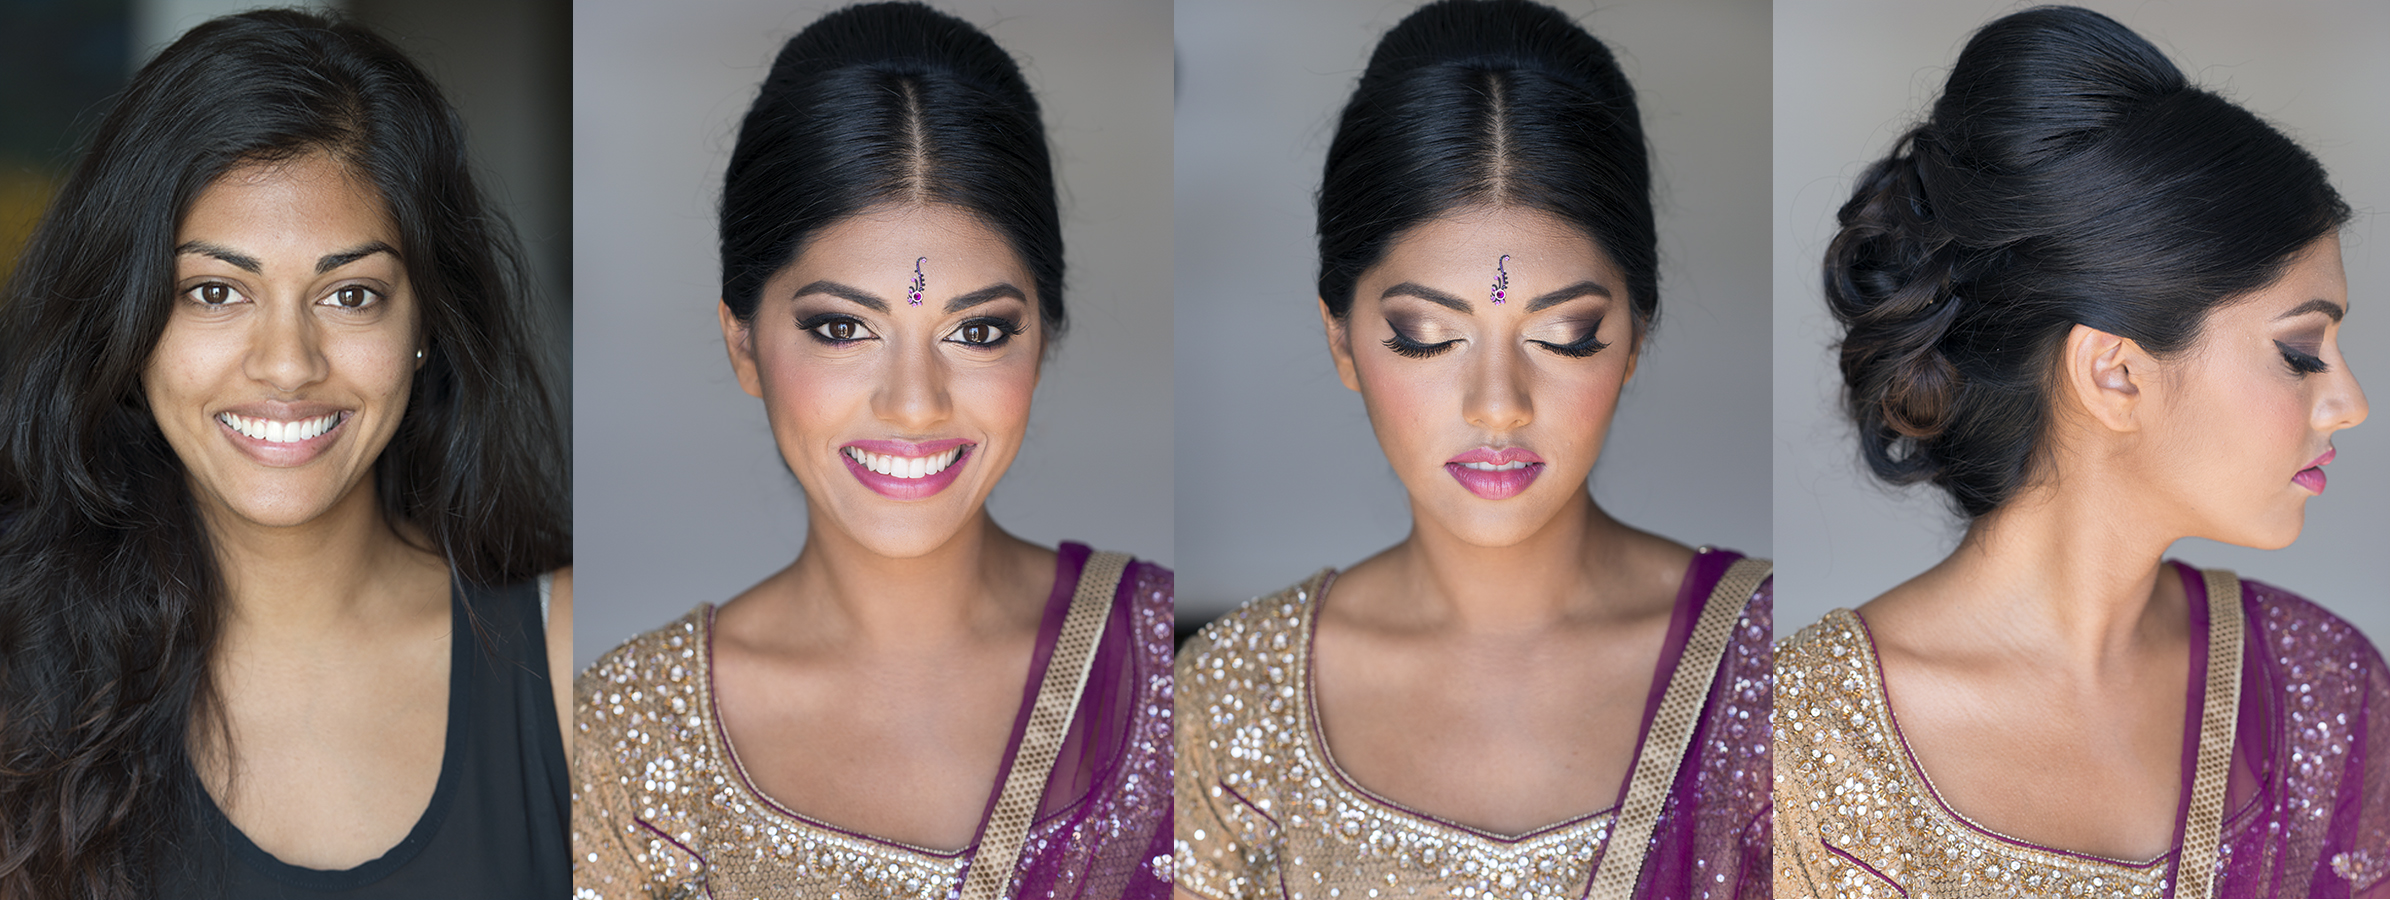 Before and after indian natural headshot makeup and hair by Agne Beauty Affair event celebration bridal pink gold smokey eyes.jpg